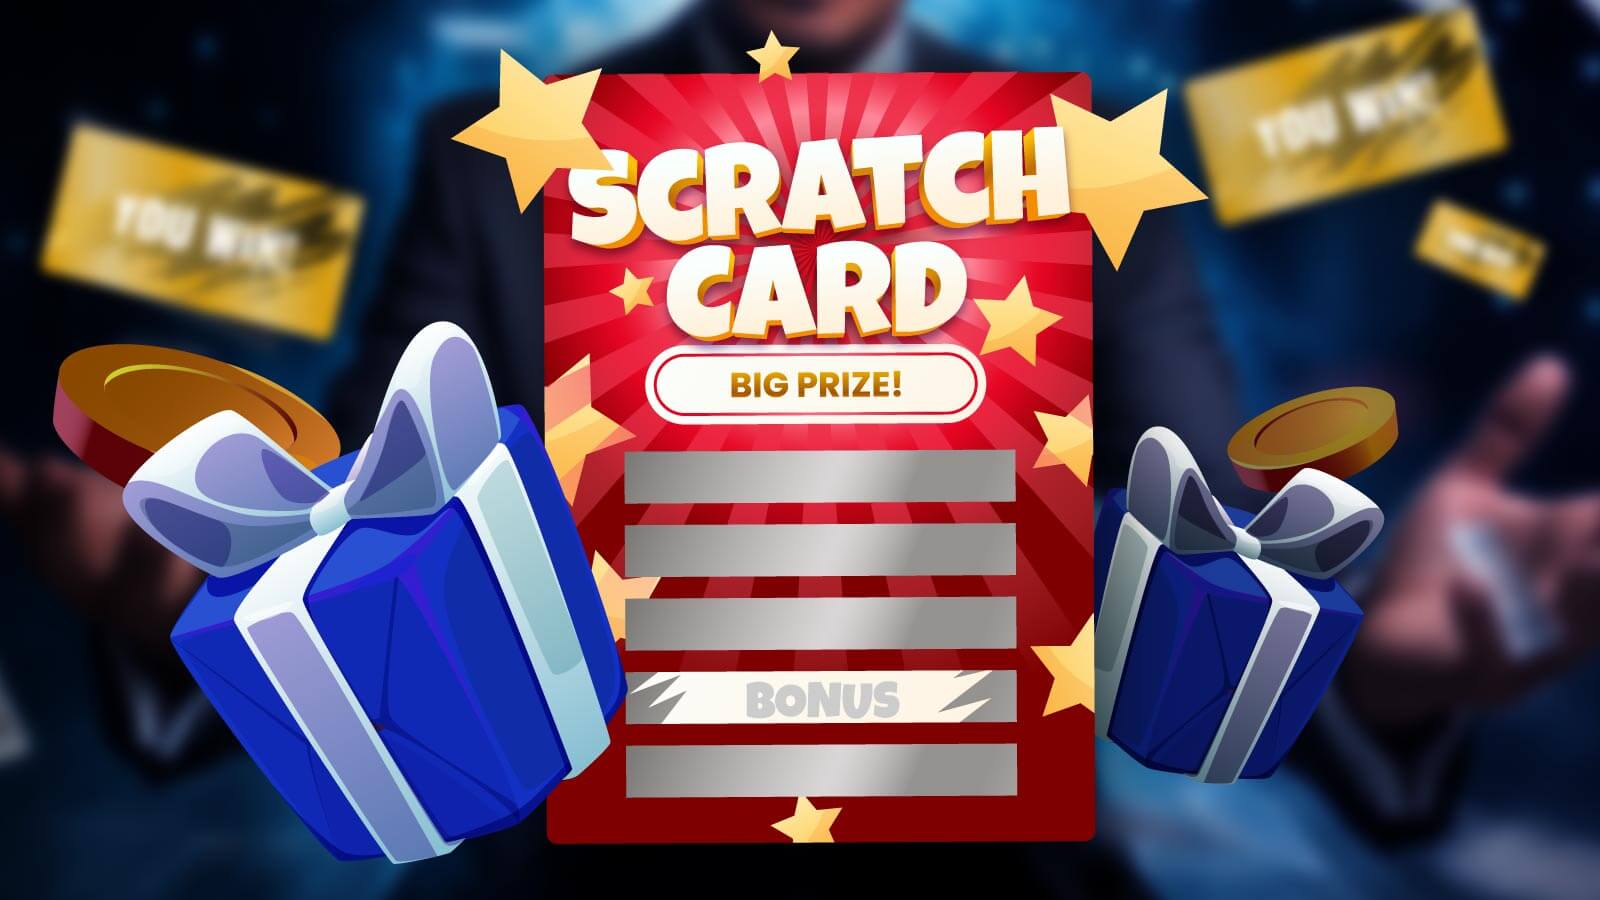 Start with Online Scratch Card Bonuses as You Build Experience